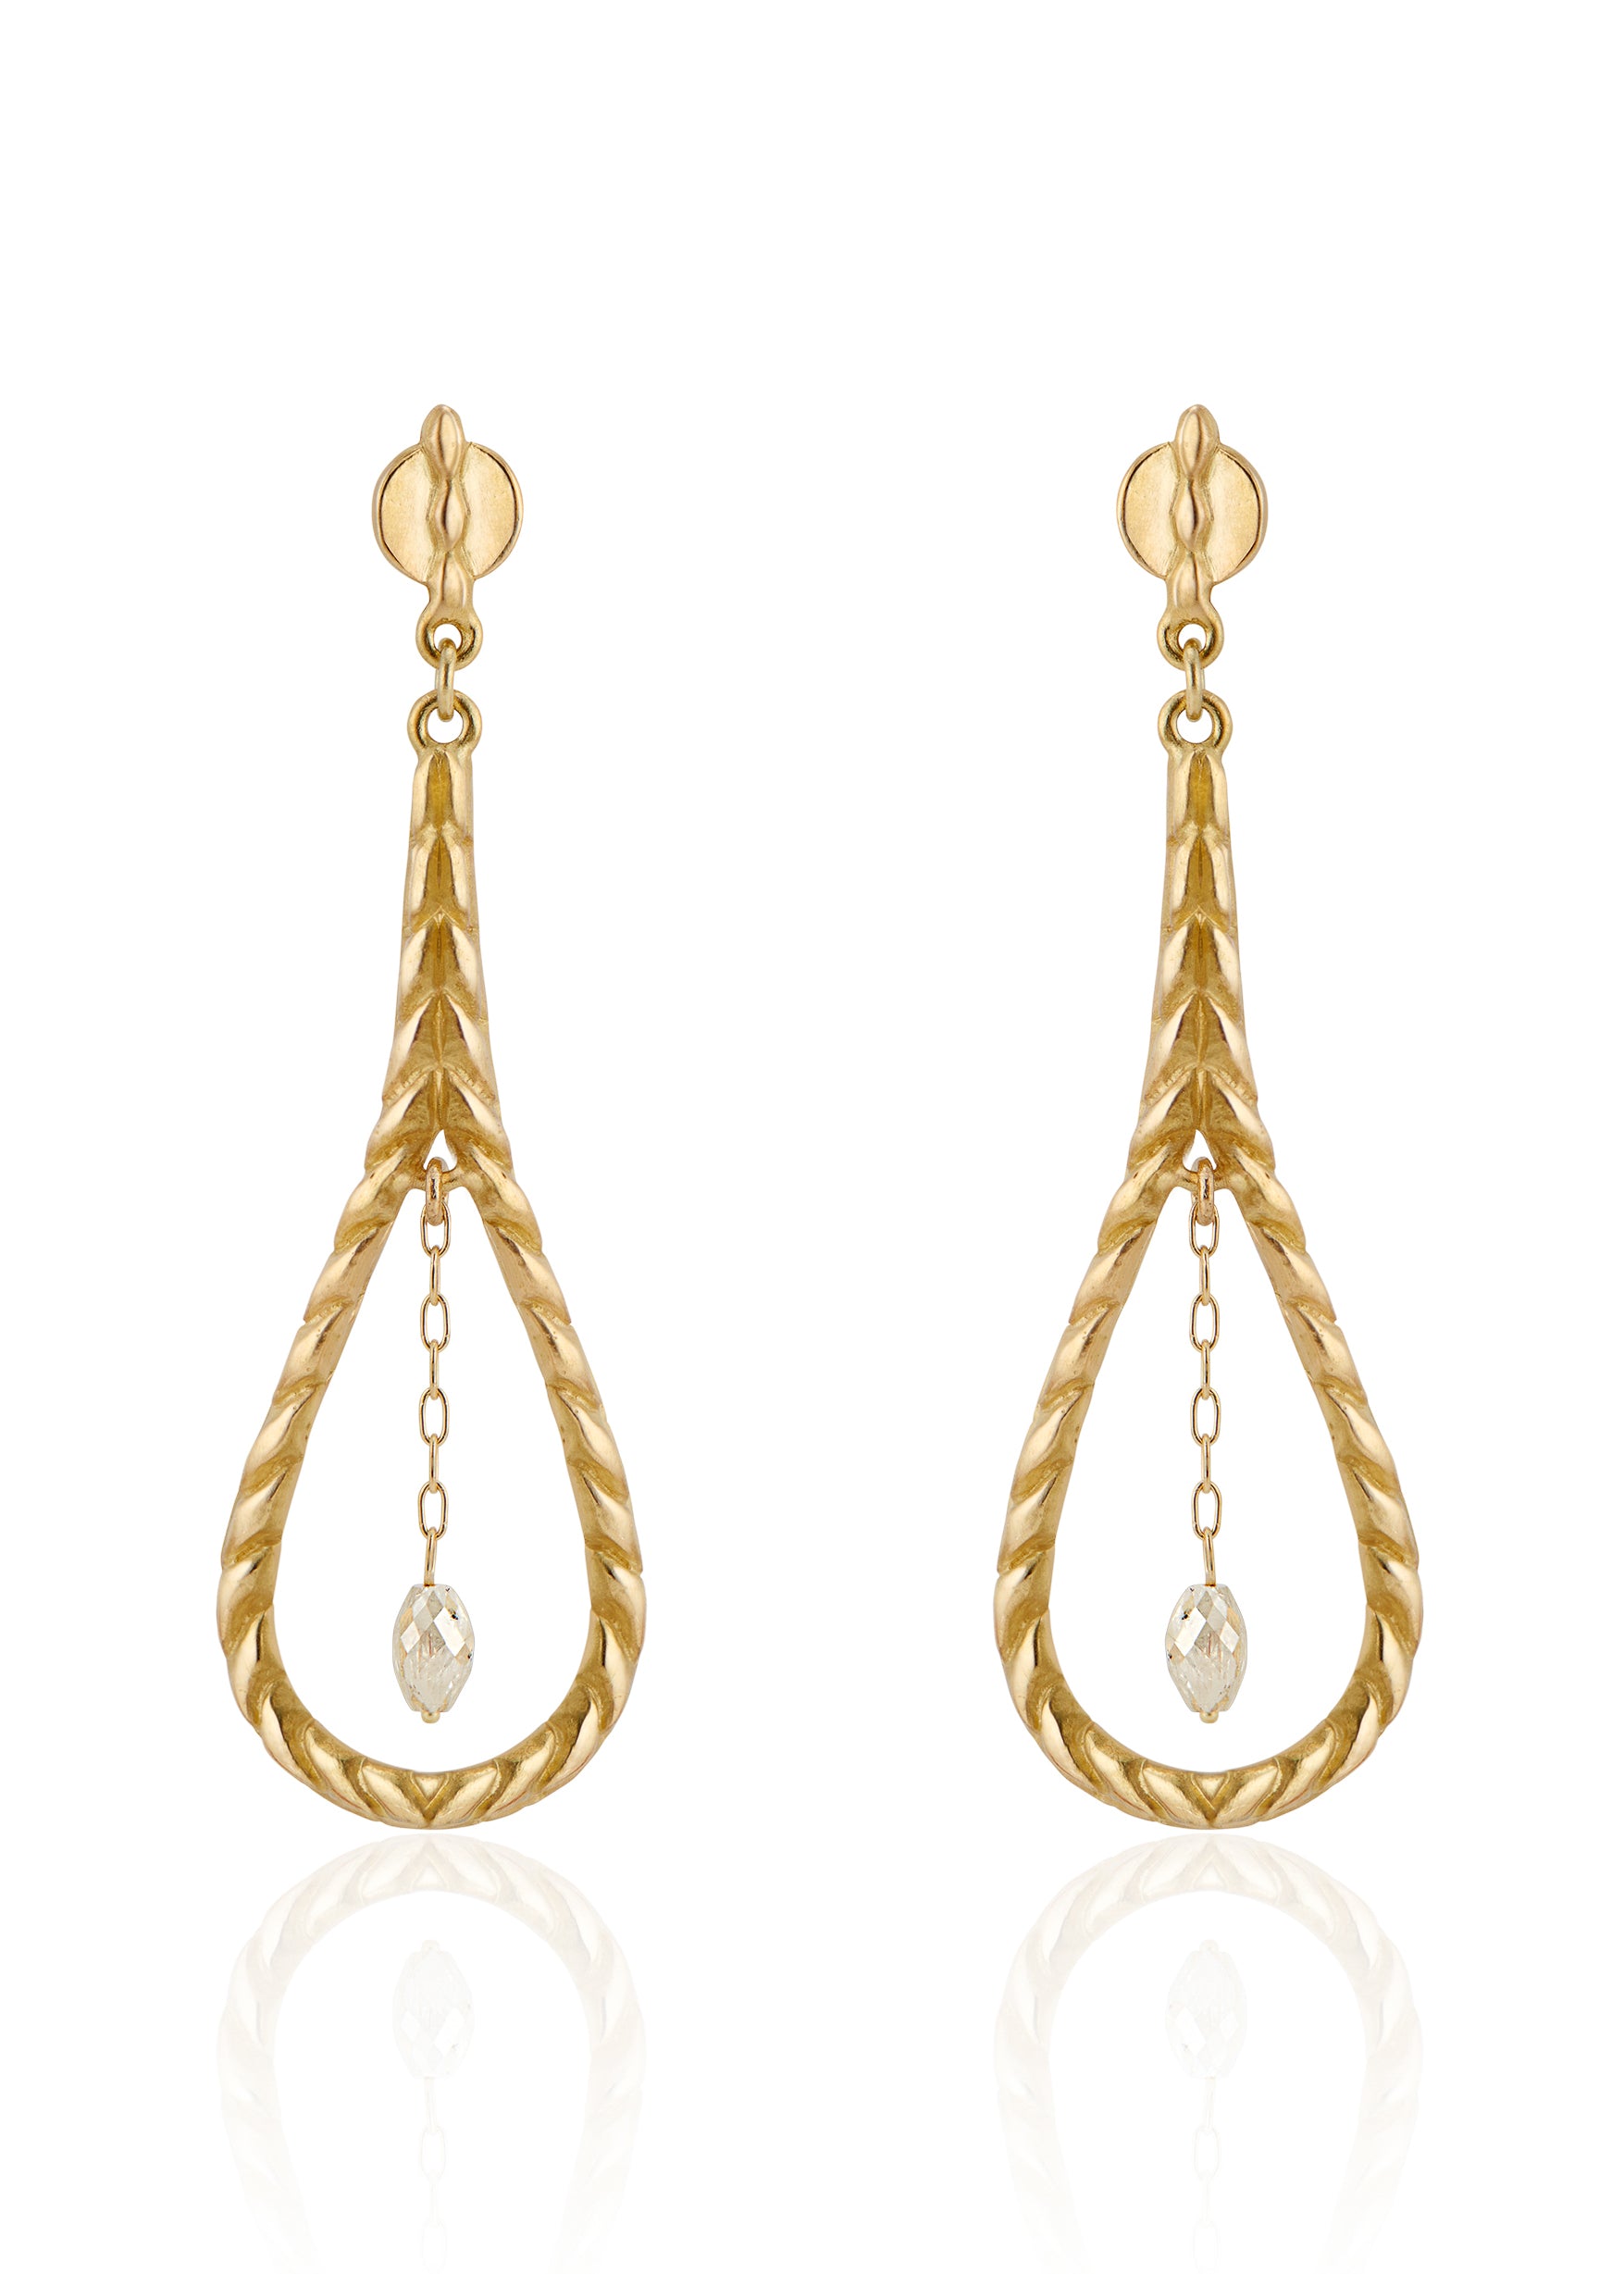 Like a song of the Siren, the Anchor earring seduces its wearer with exquisite craftsmanship and use of negative space. The hand-carved, rope-like detail highlights the elongated shape, lending an elegant nautical touch. Inside, diamond beads dangle from a delicate chain, a glint of sunlight on water that draws the eye in and captivates. 